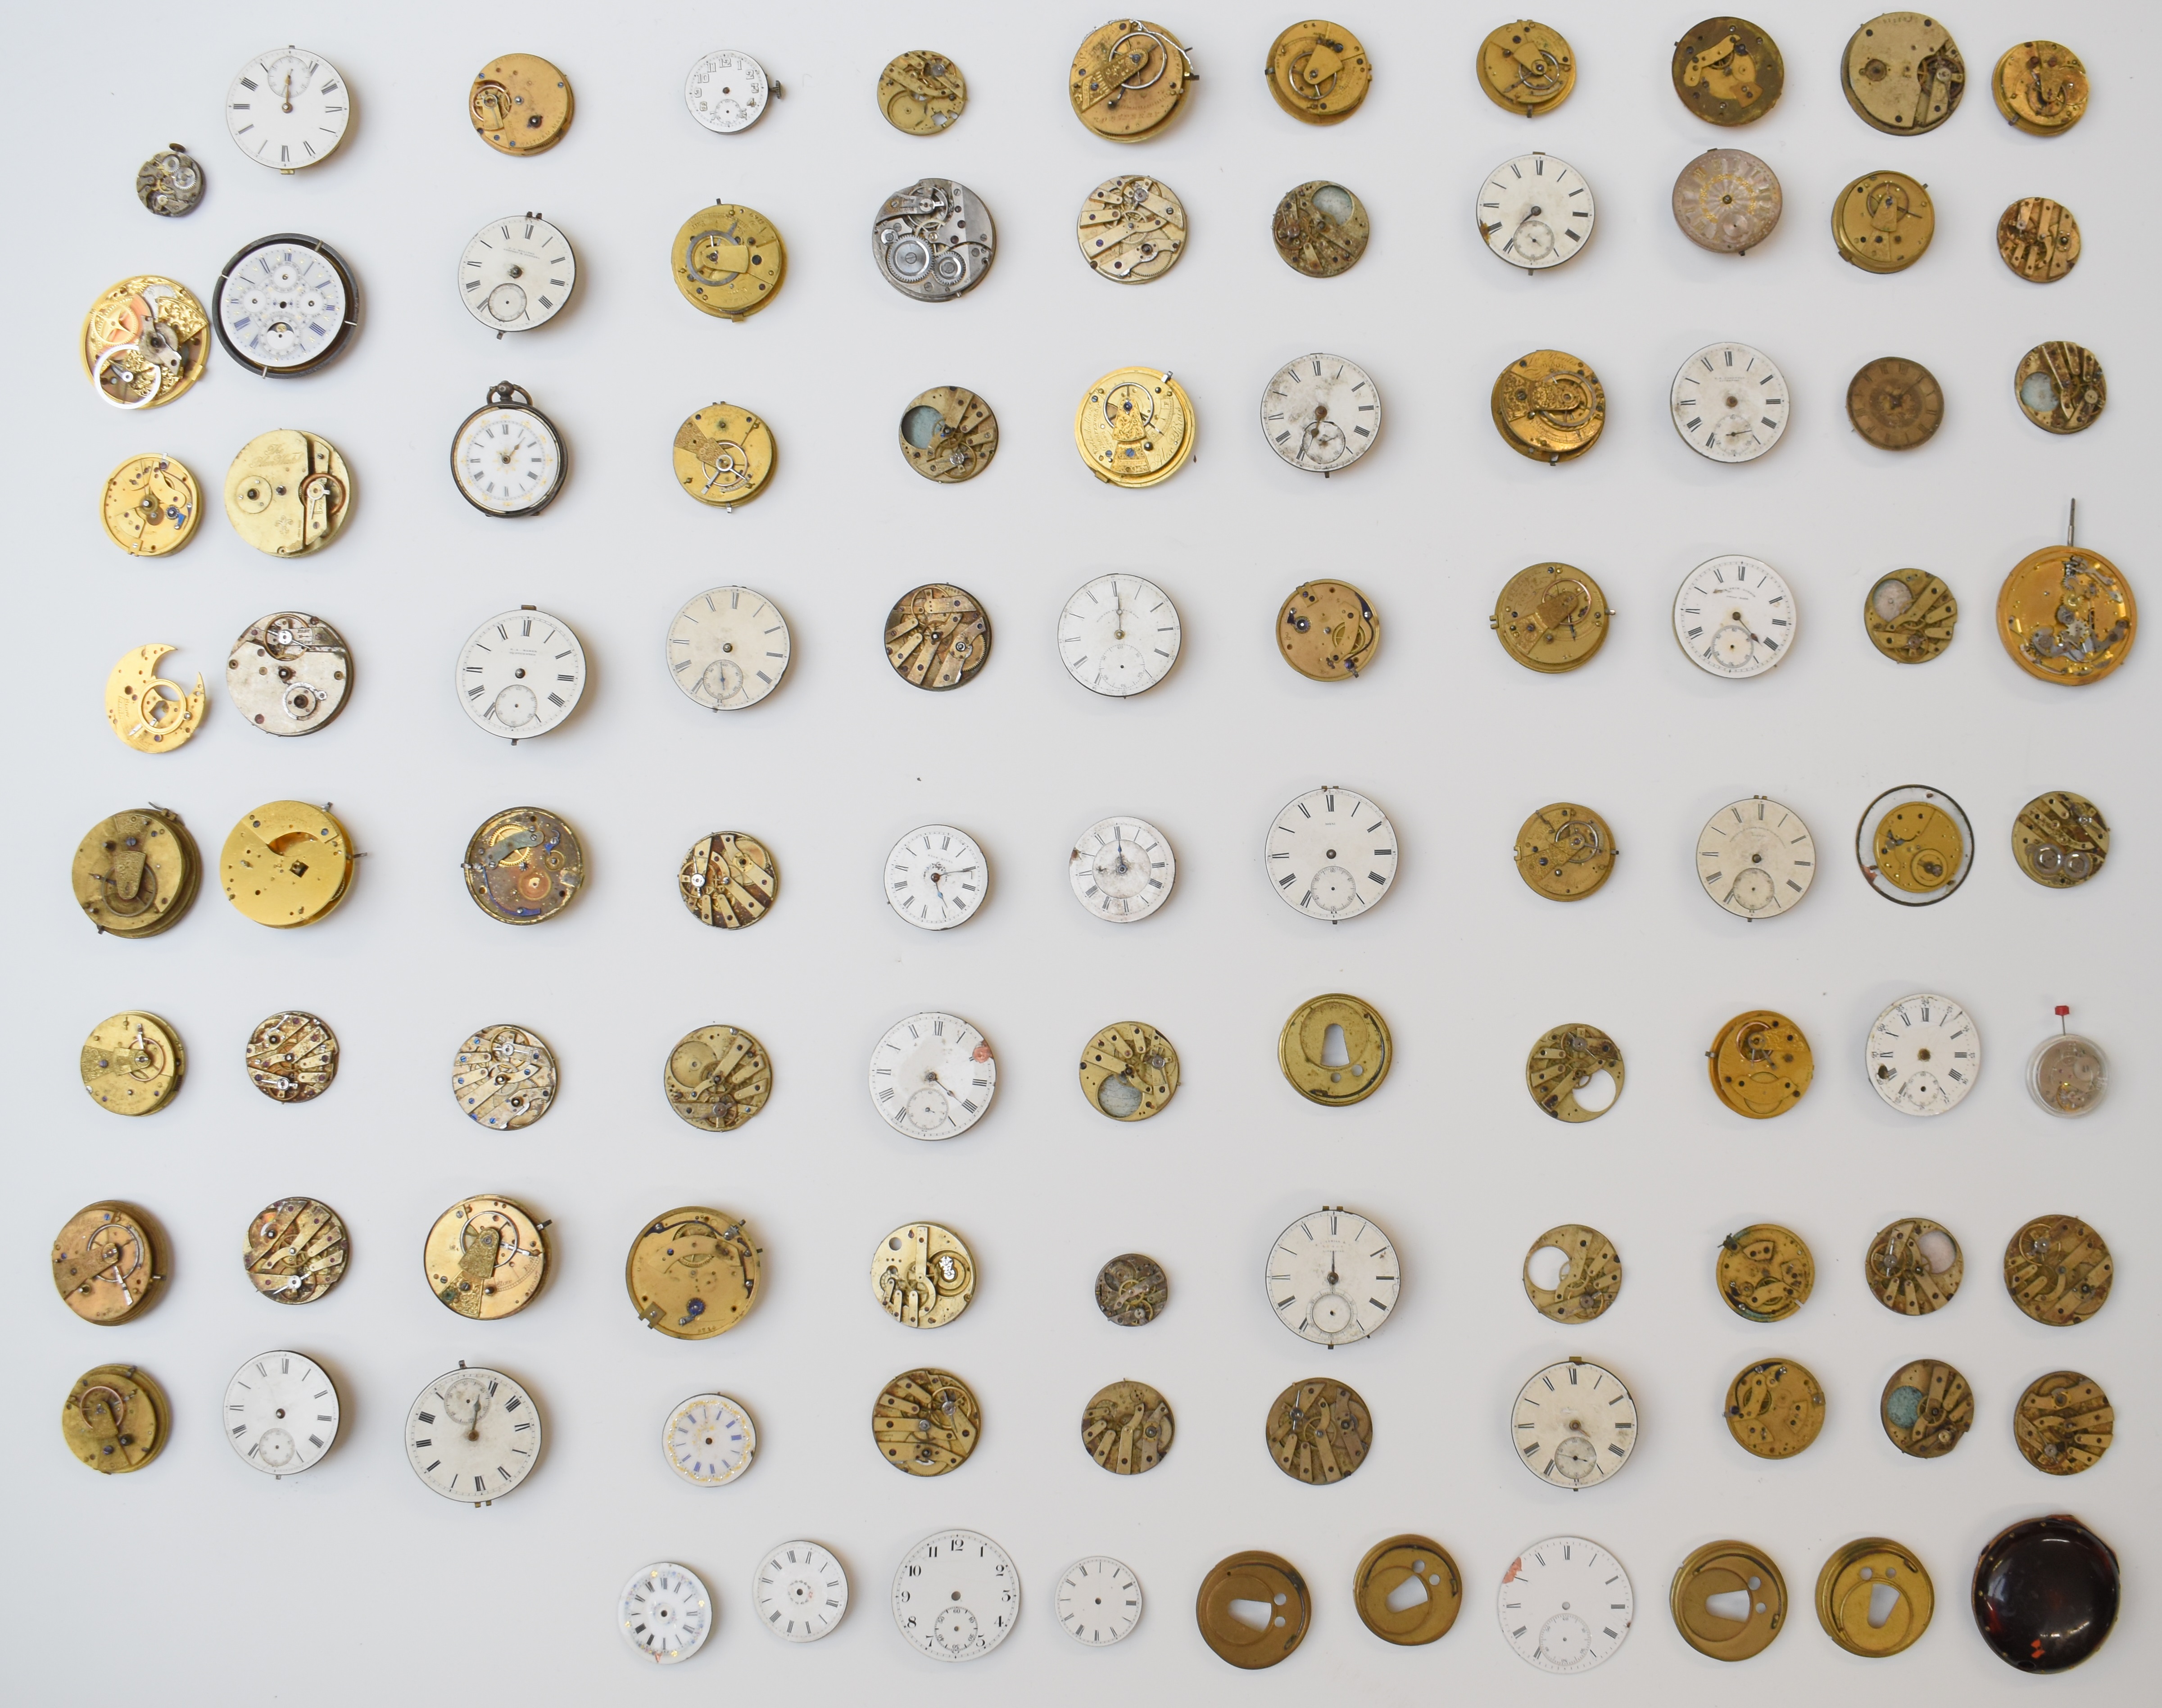 Large collection of pocket watch movements, dials and parts including fusee movements, tortoiseshell - Image 2 of 19